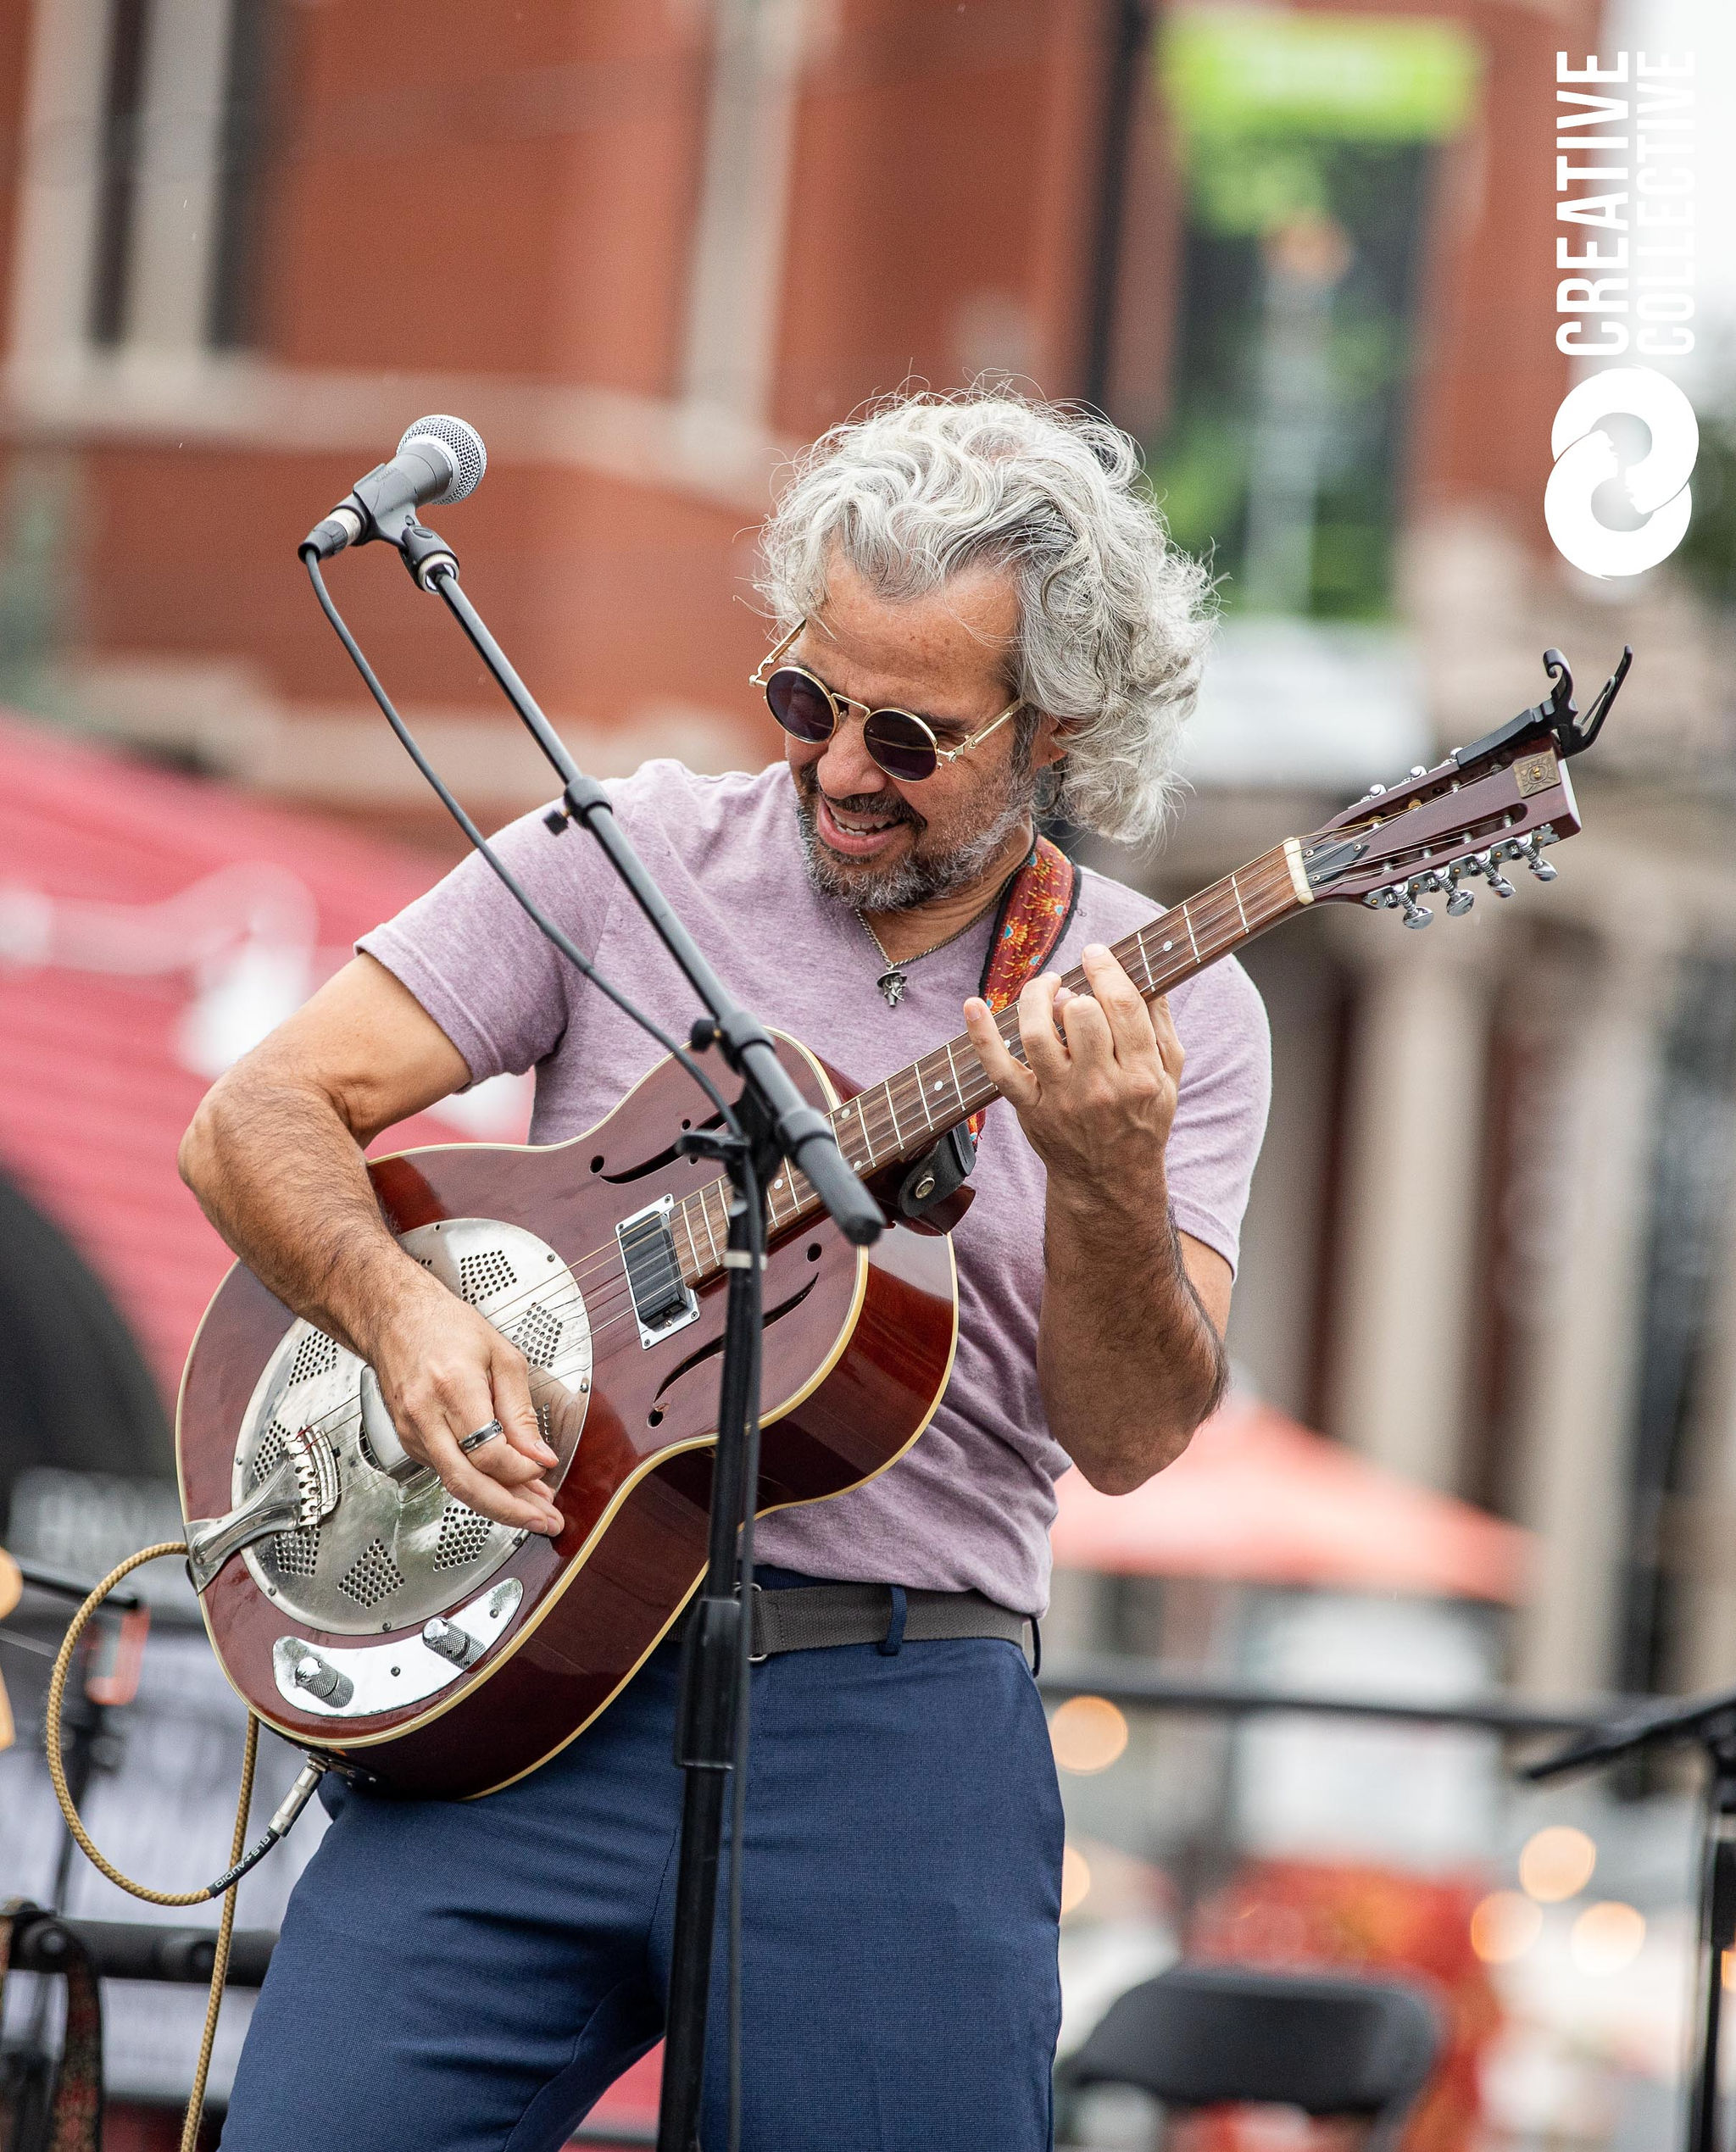 a man with grey hair plays a guitar on stage at the Peabody International Festival